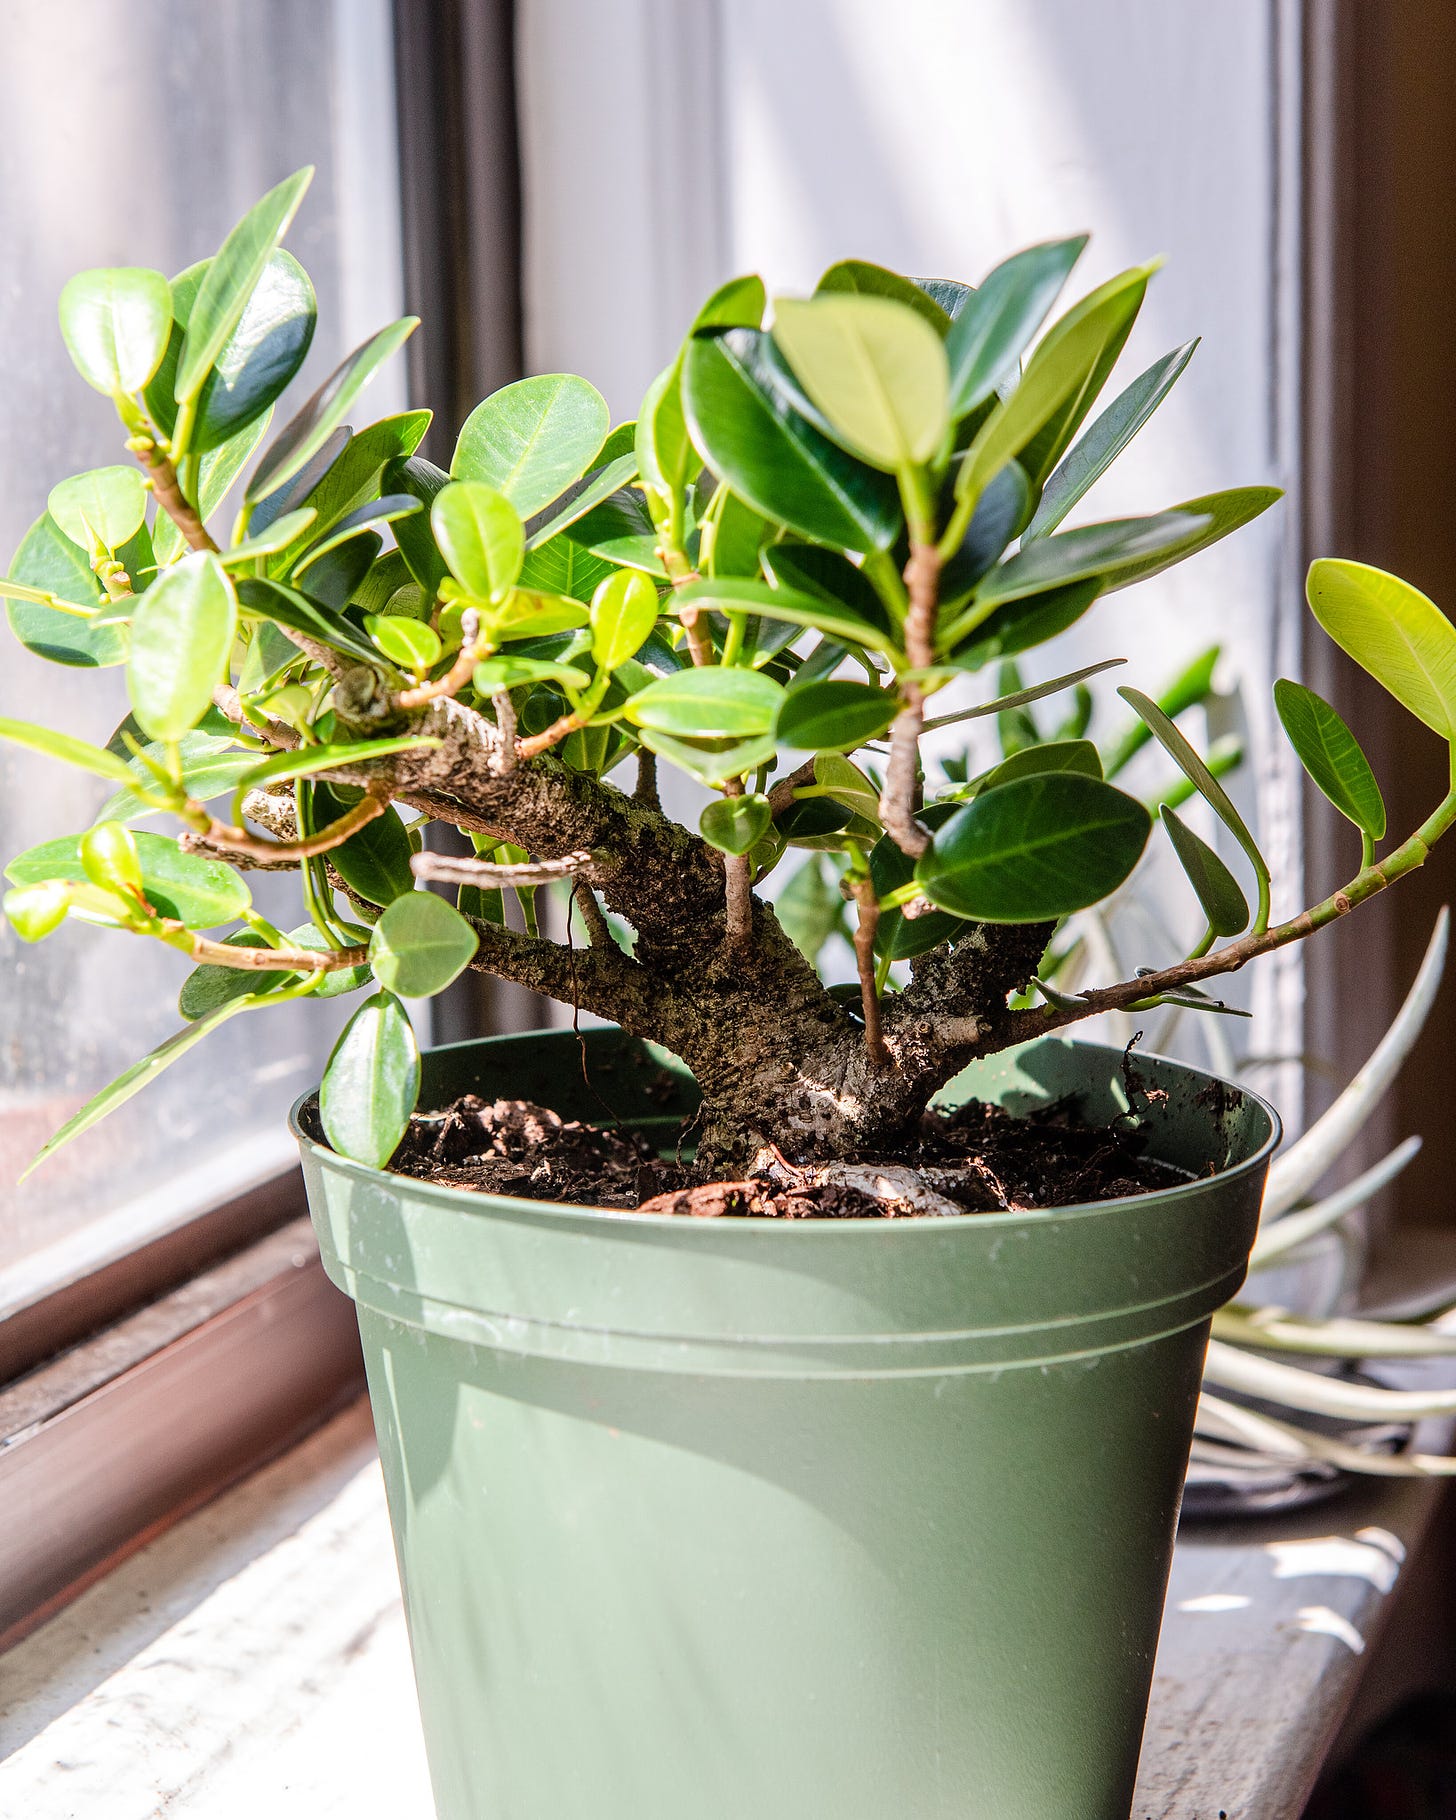 ID: The same ficus, on a window, but immature and in a thick plastic pot